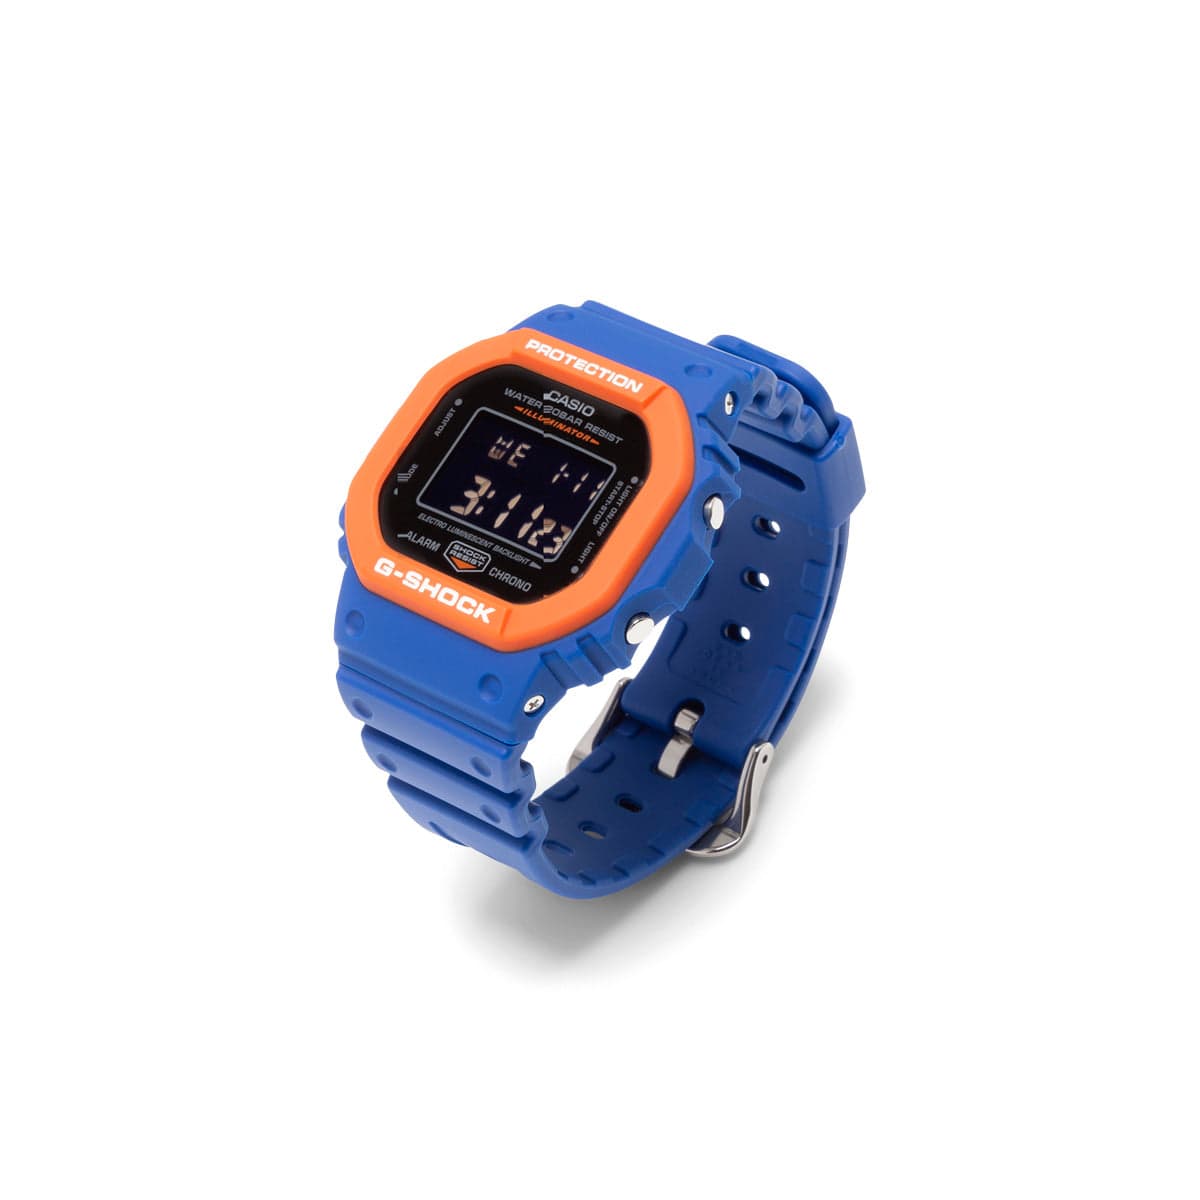 G-Shock Watches BLUE/RED / O/S DW5610SC-2